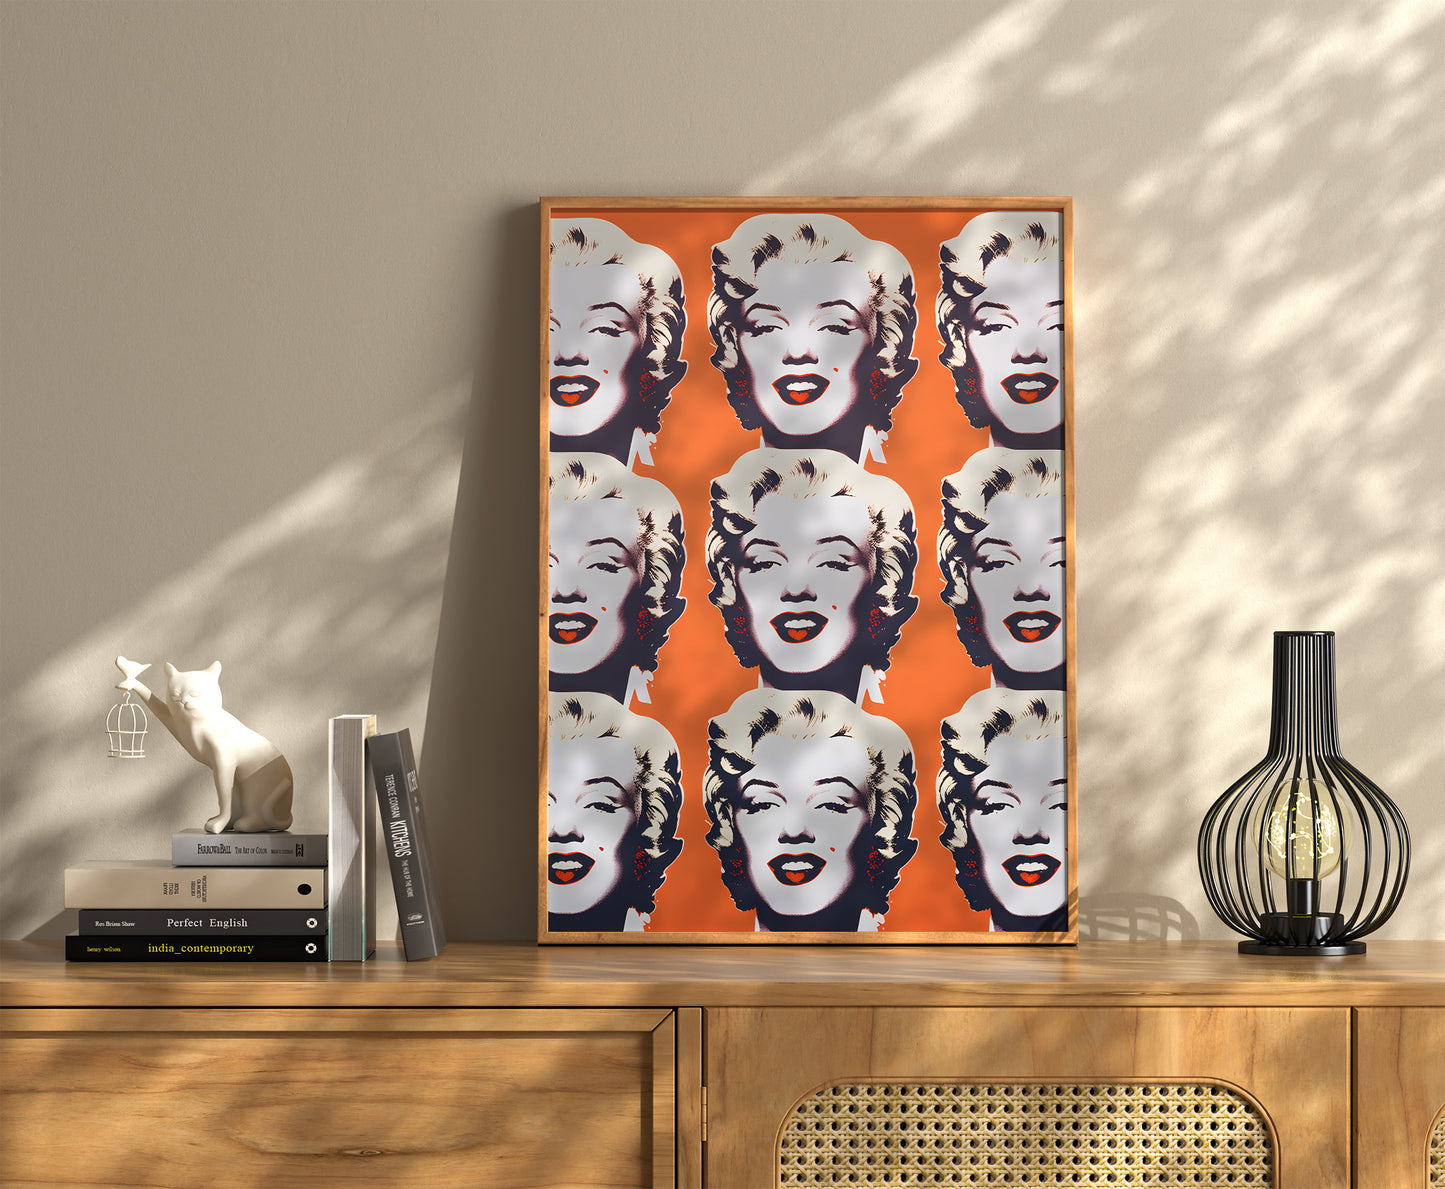 Pop art style artwork of a celebrity with multiple faces on a wall above a sideboard.